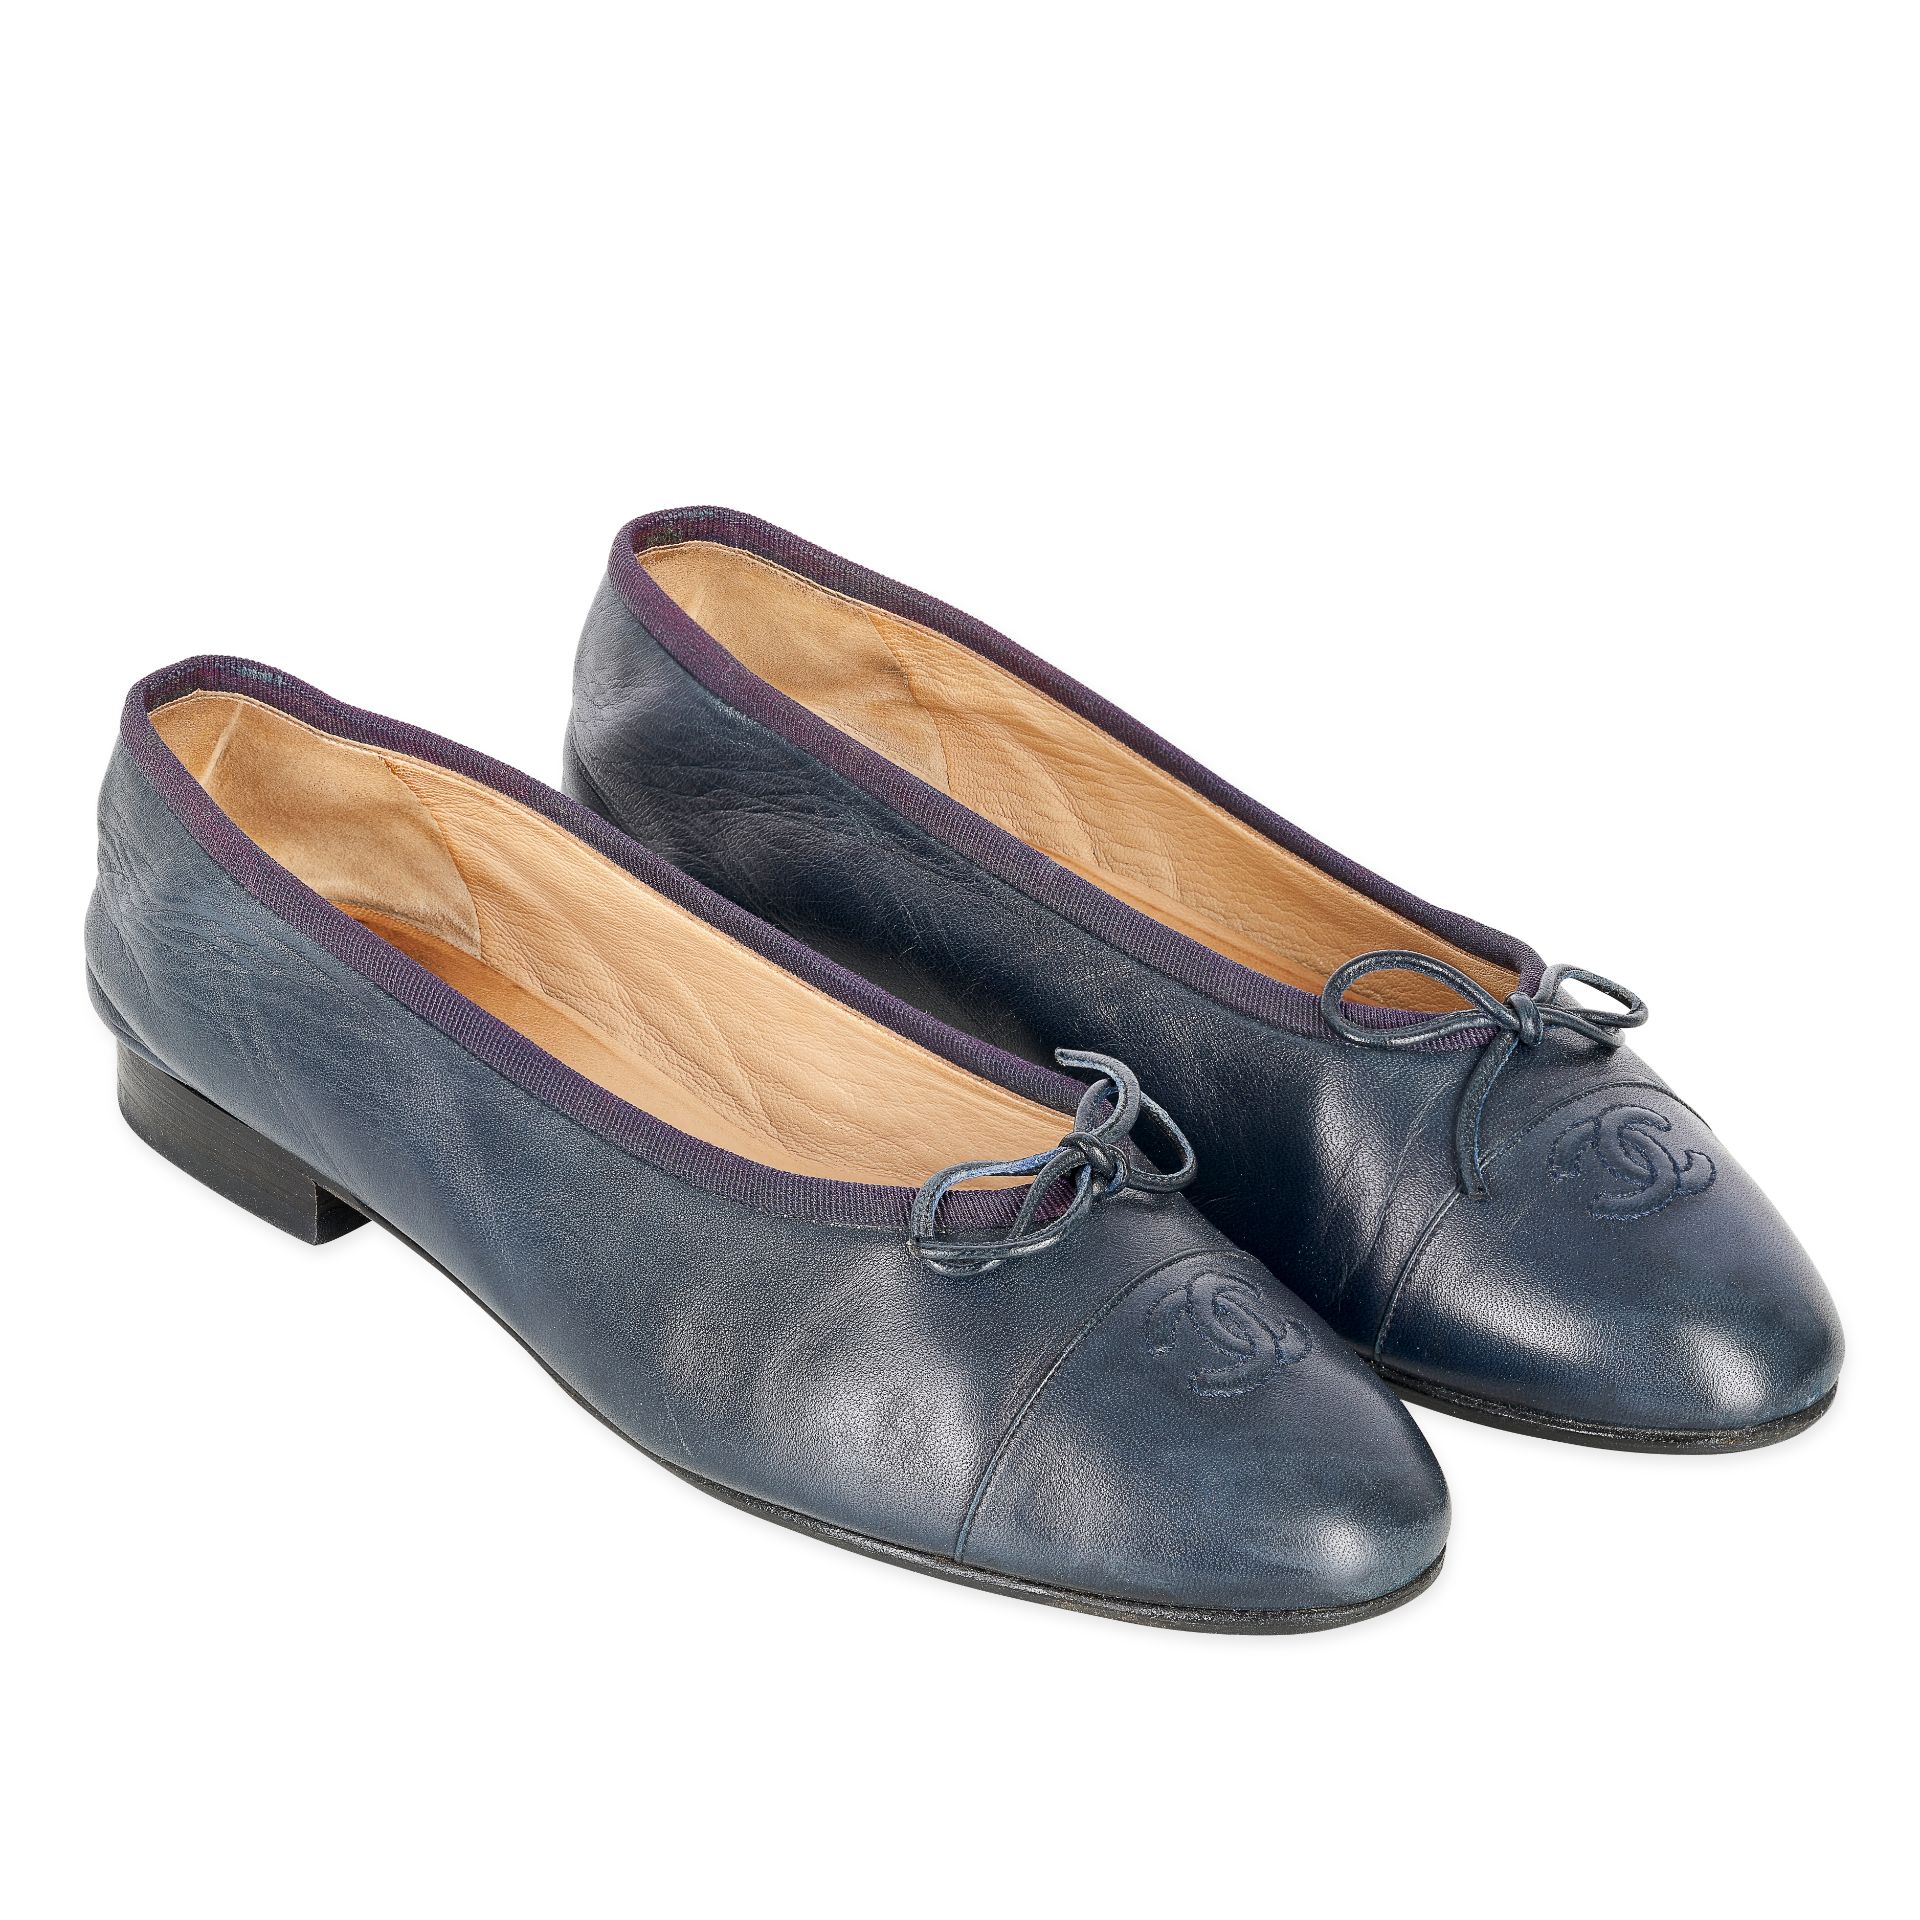 CHANEL NAVY BLUE BALLERINA FLATS  Condition grade B-.  Size 39.5. Navy blue toned leather balle...